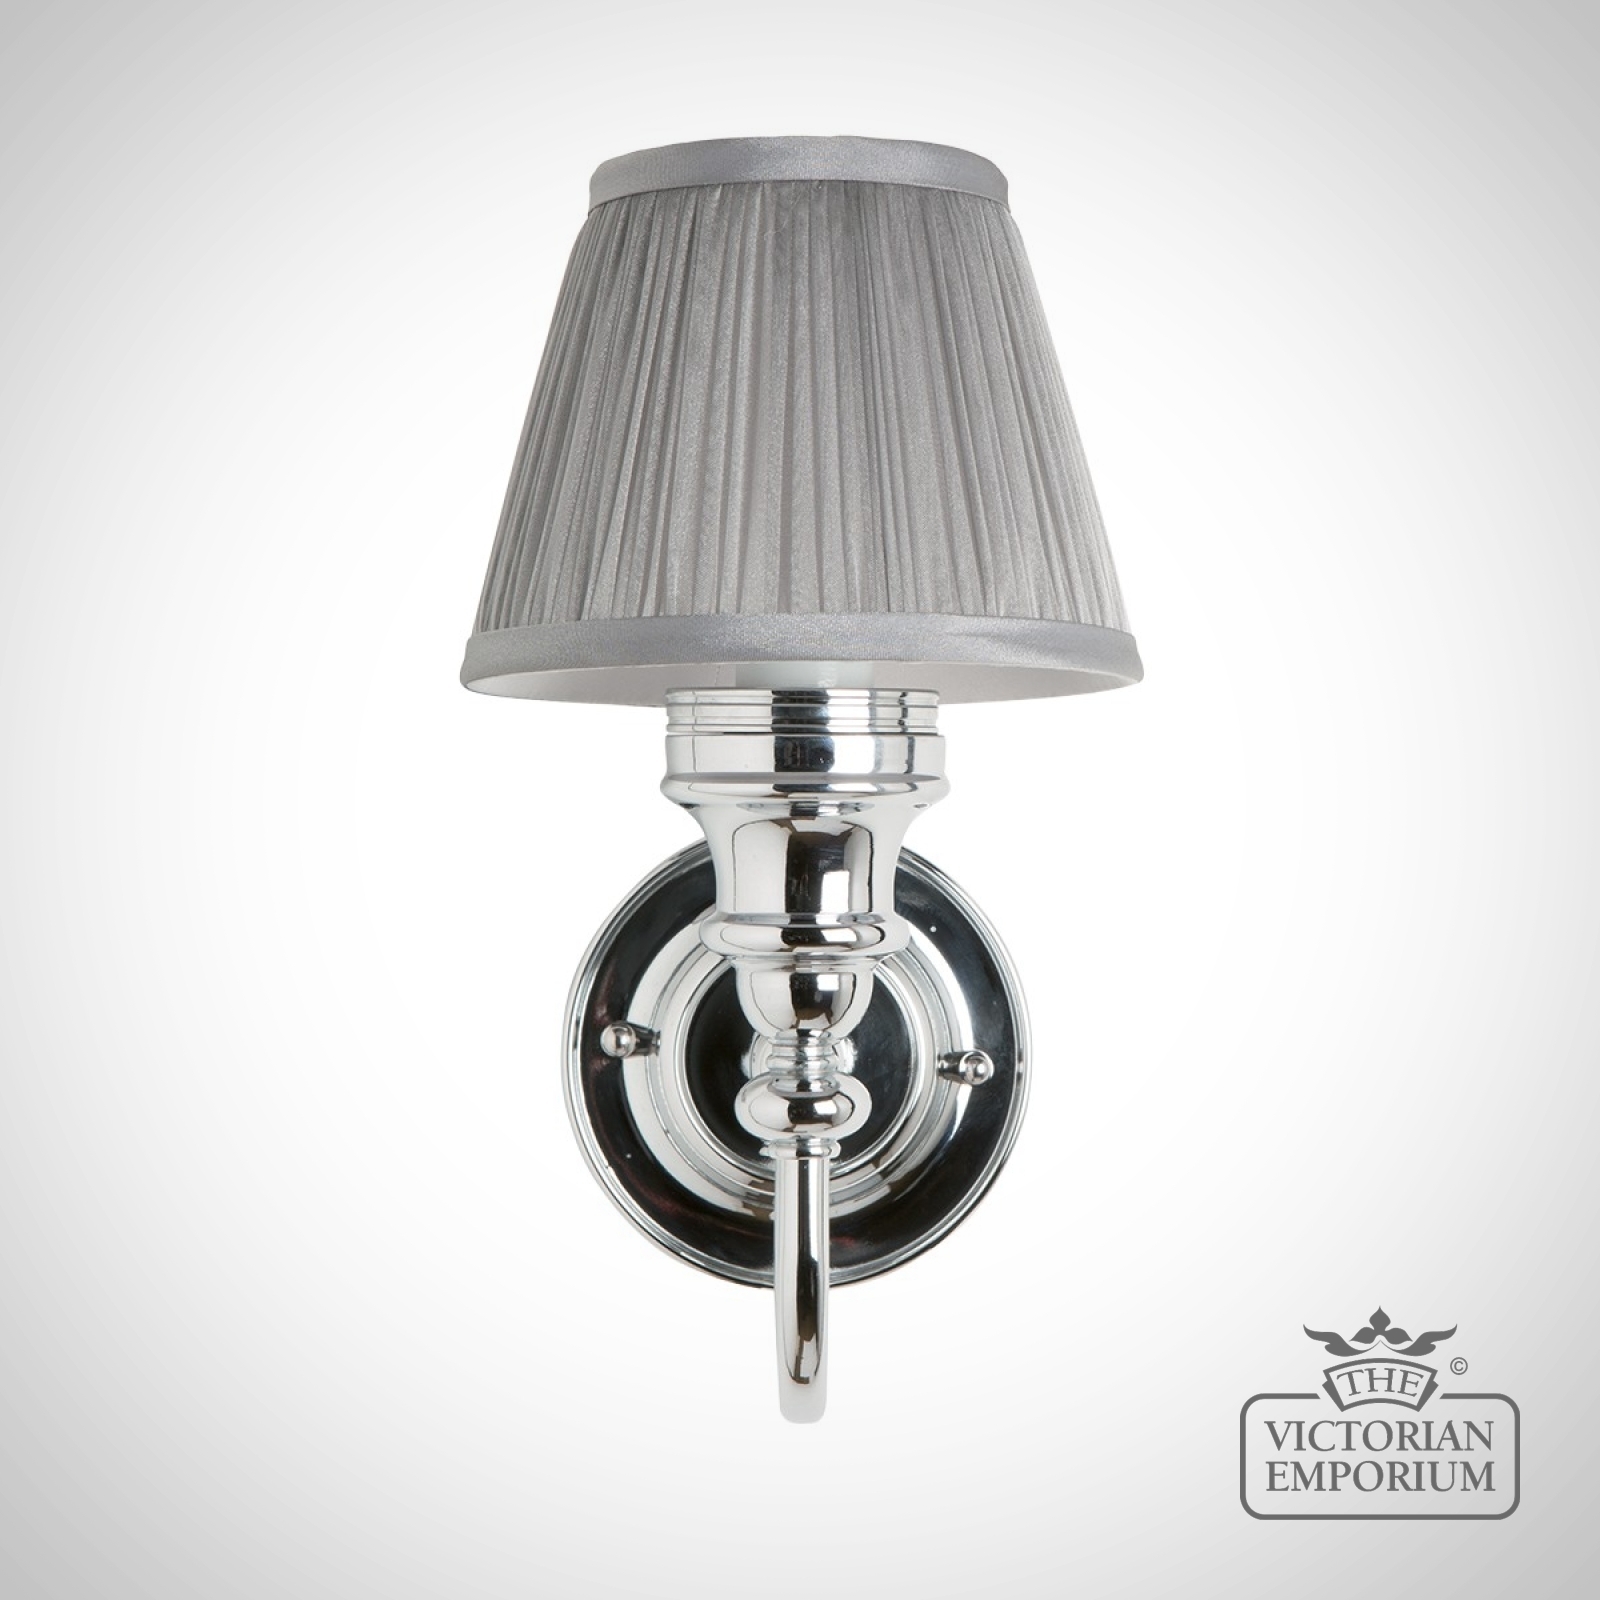 Classic Bathroom Light With Chrome Base, Silver Chiffon Shade And Finial